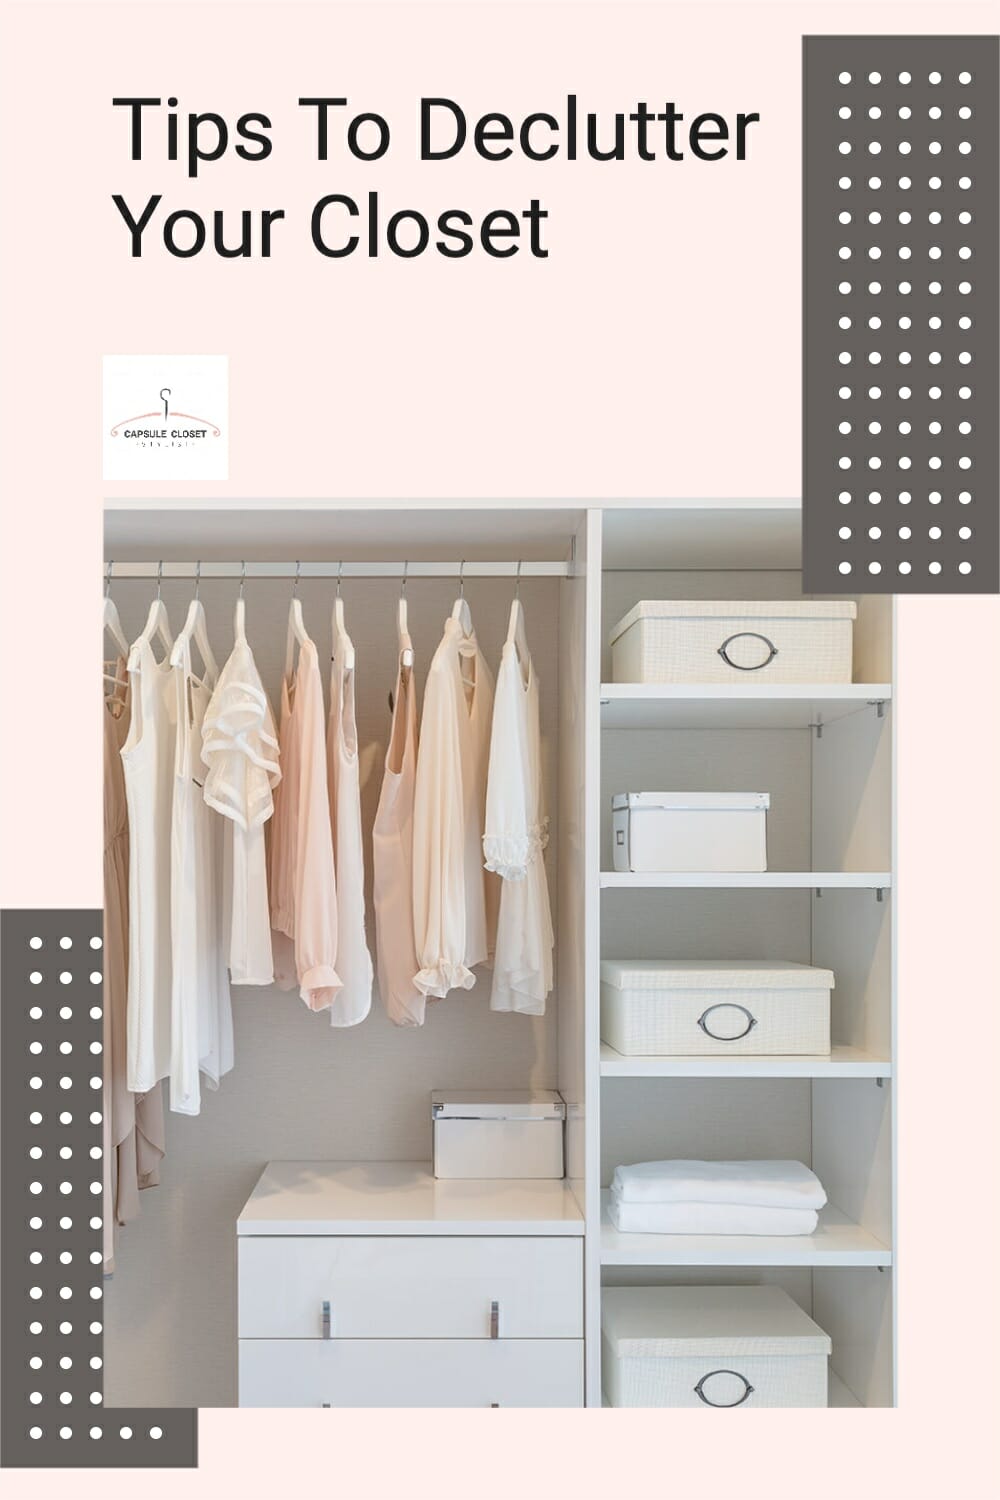 Keep Or Discard Tips To Declutter Your Closet - Capsule Closet Stylist